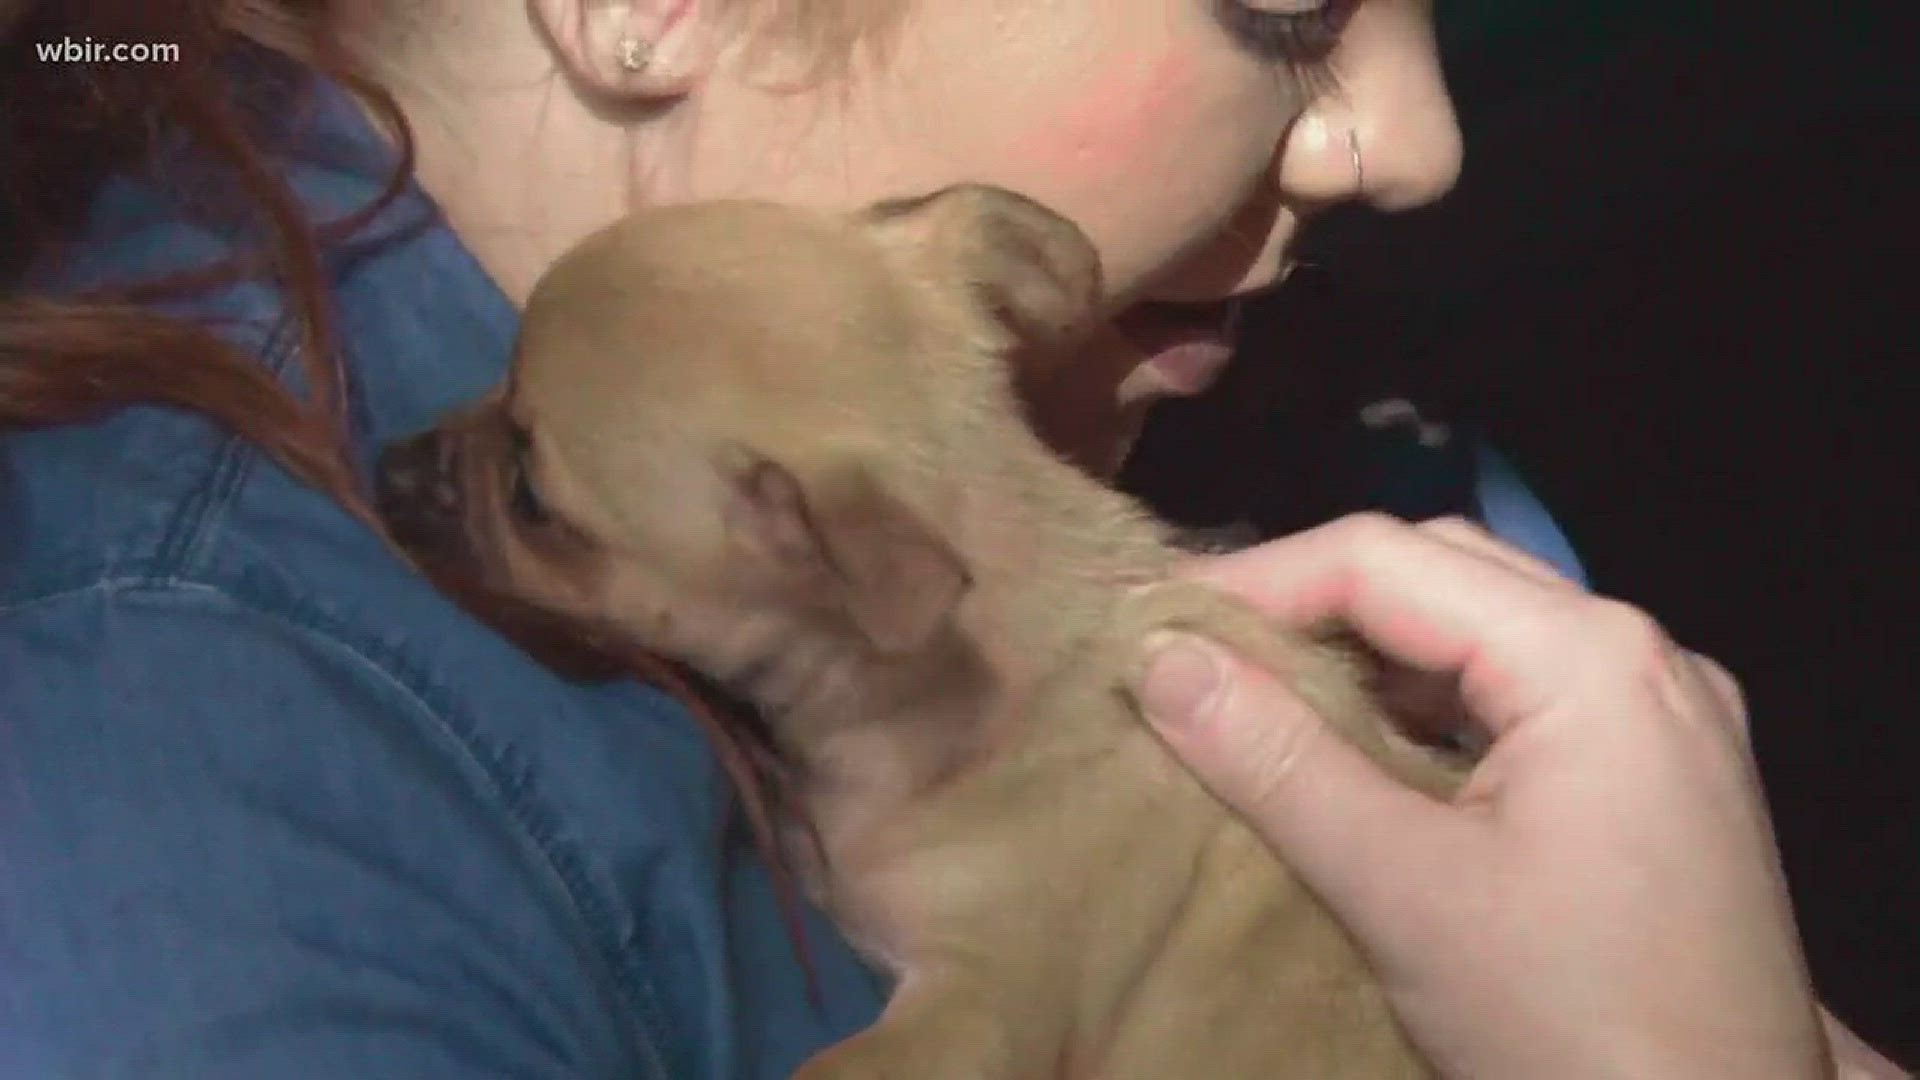 The Cuddle Bus teamed up with Knox Brew Tours for a puppy snuggle event.